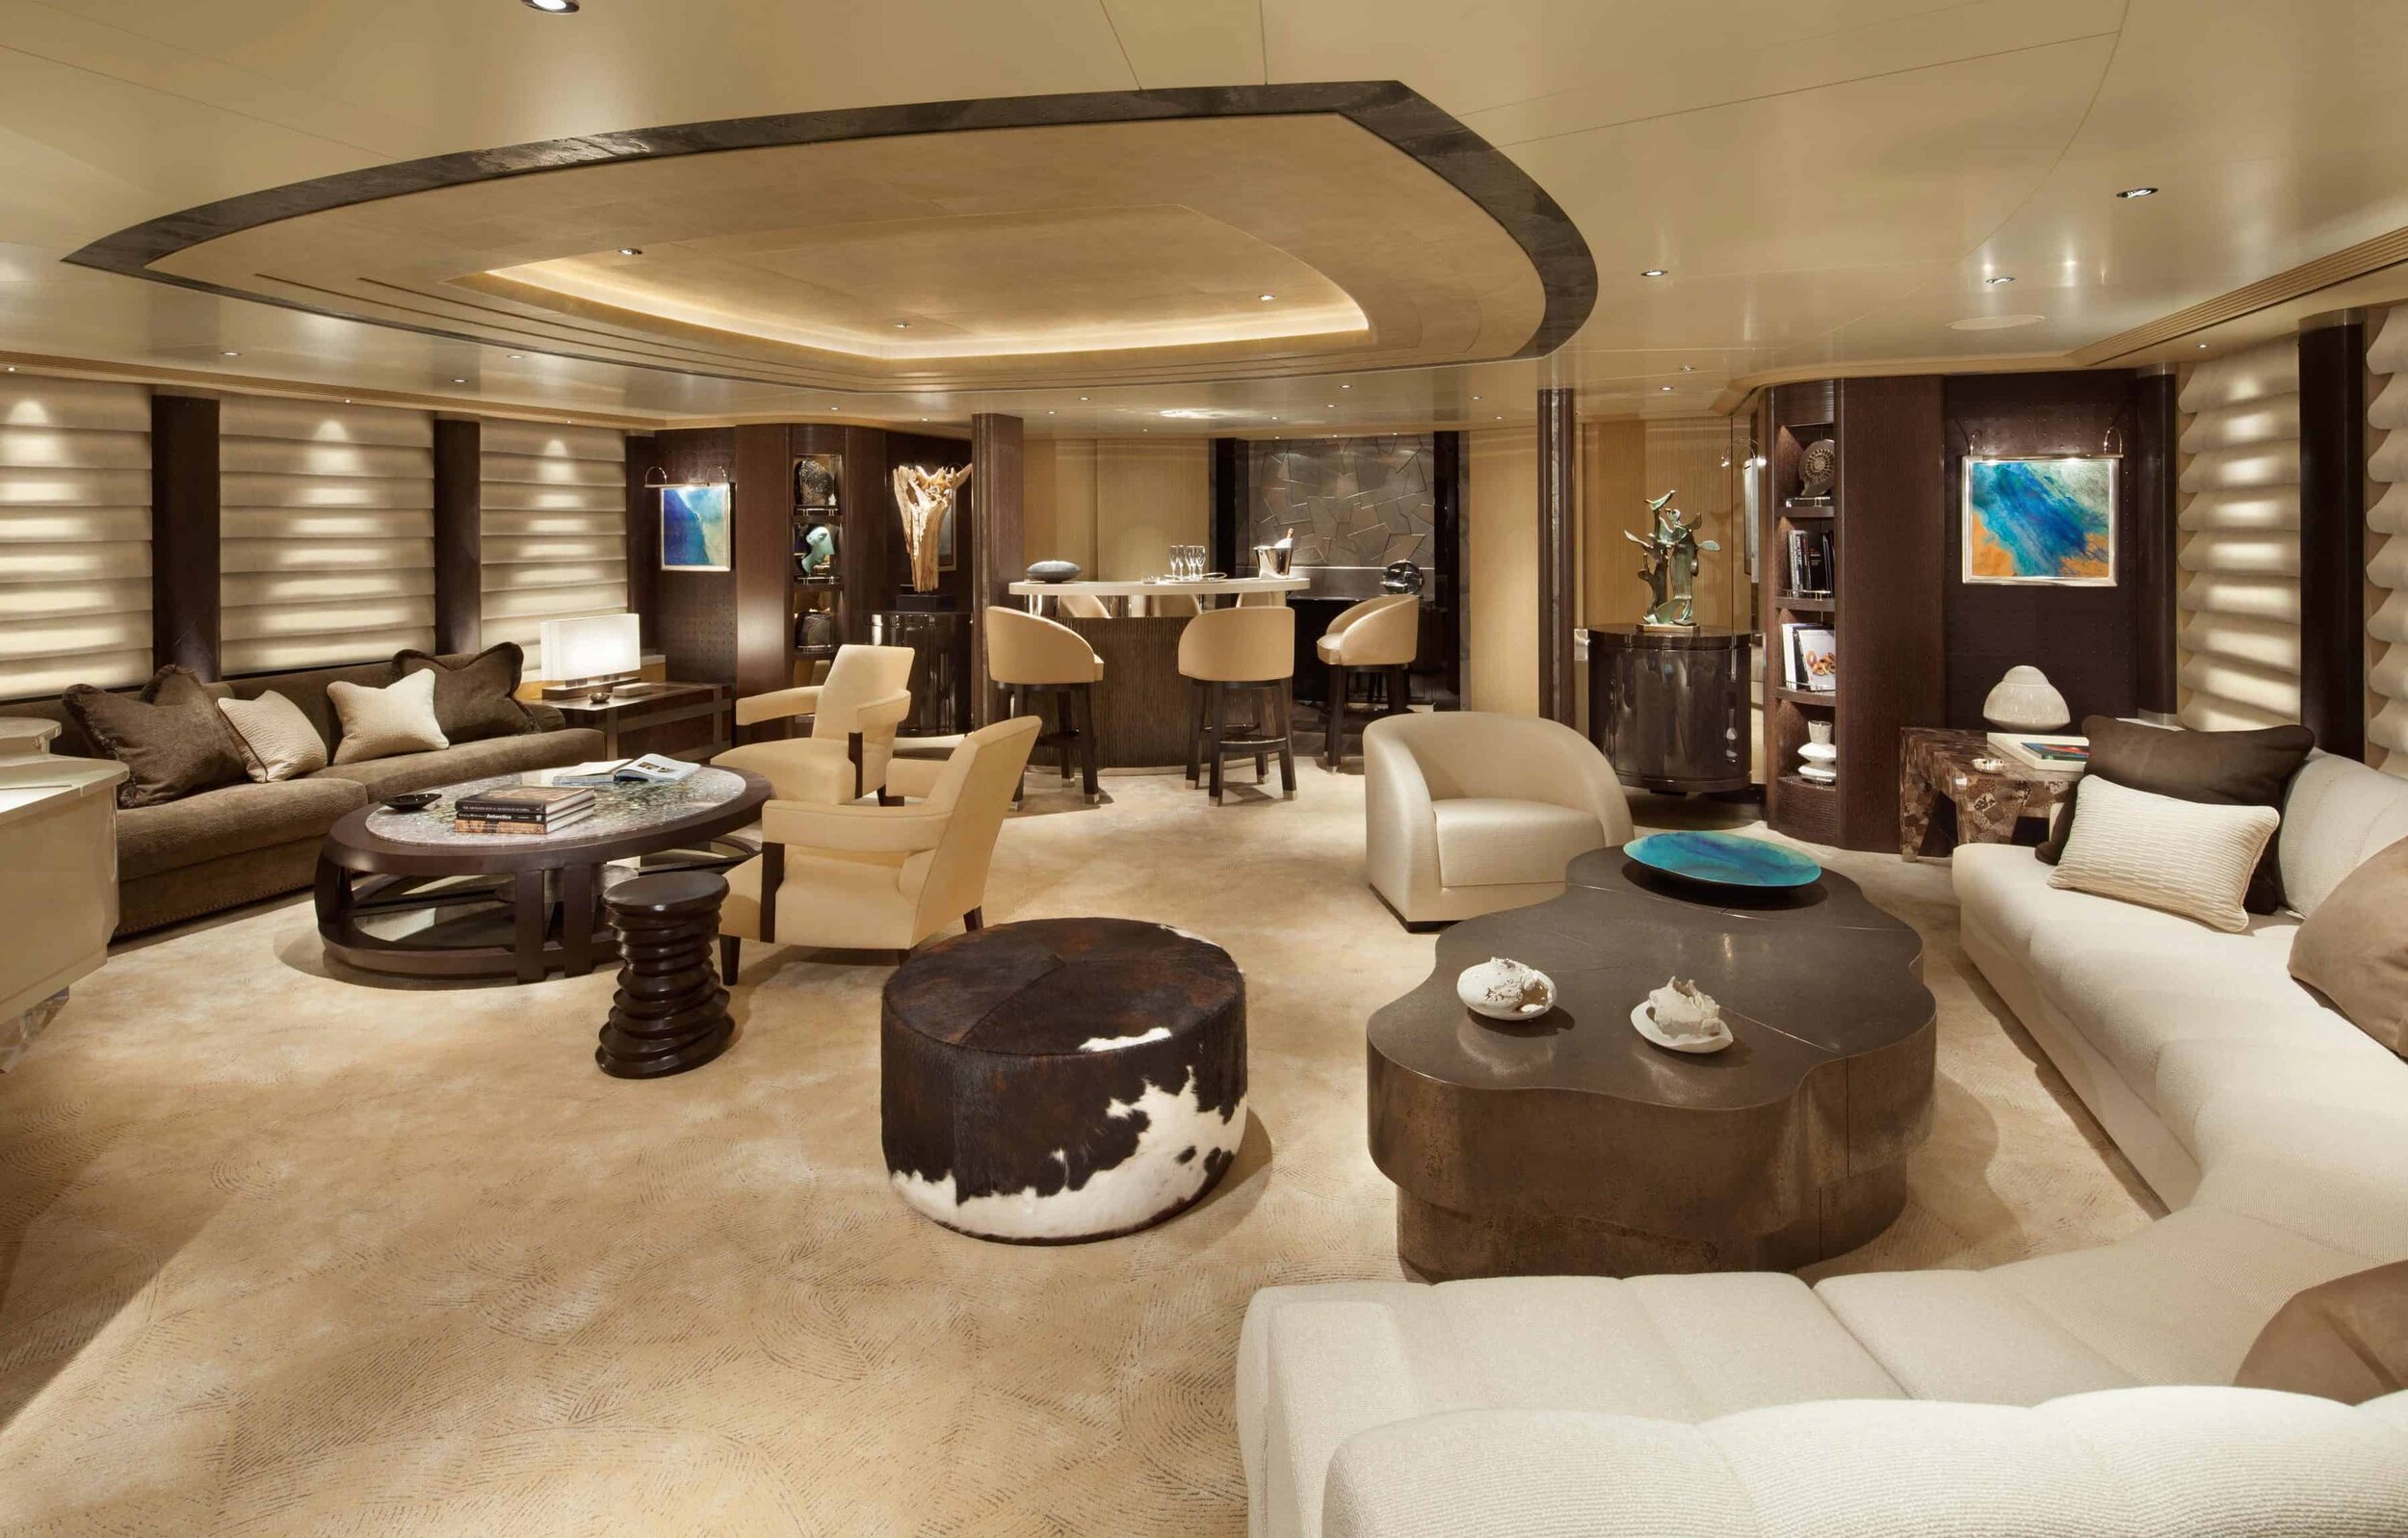 yachts for sale with elevators